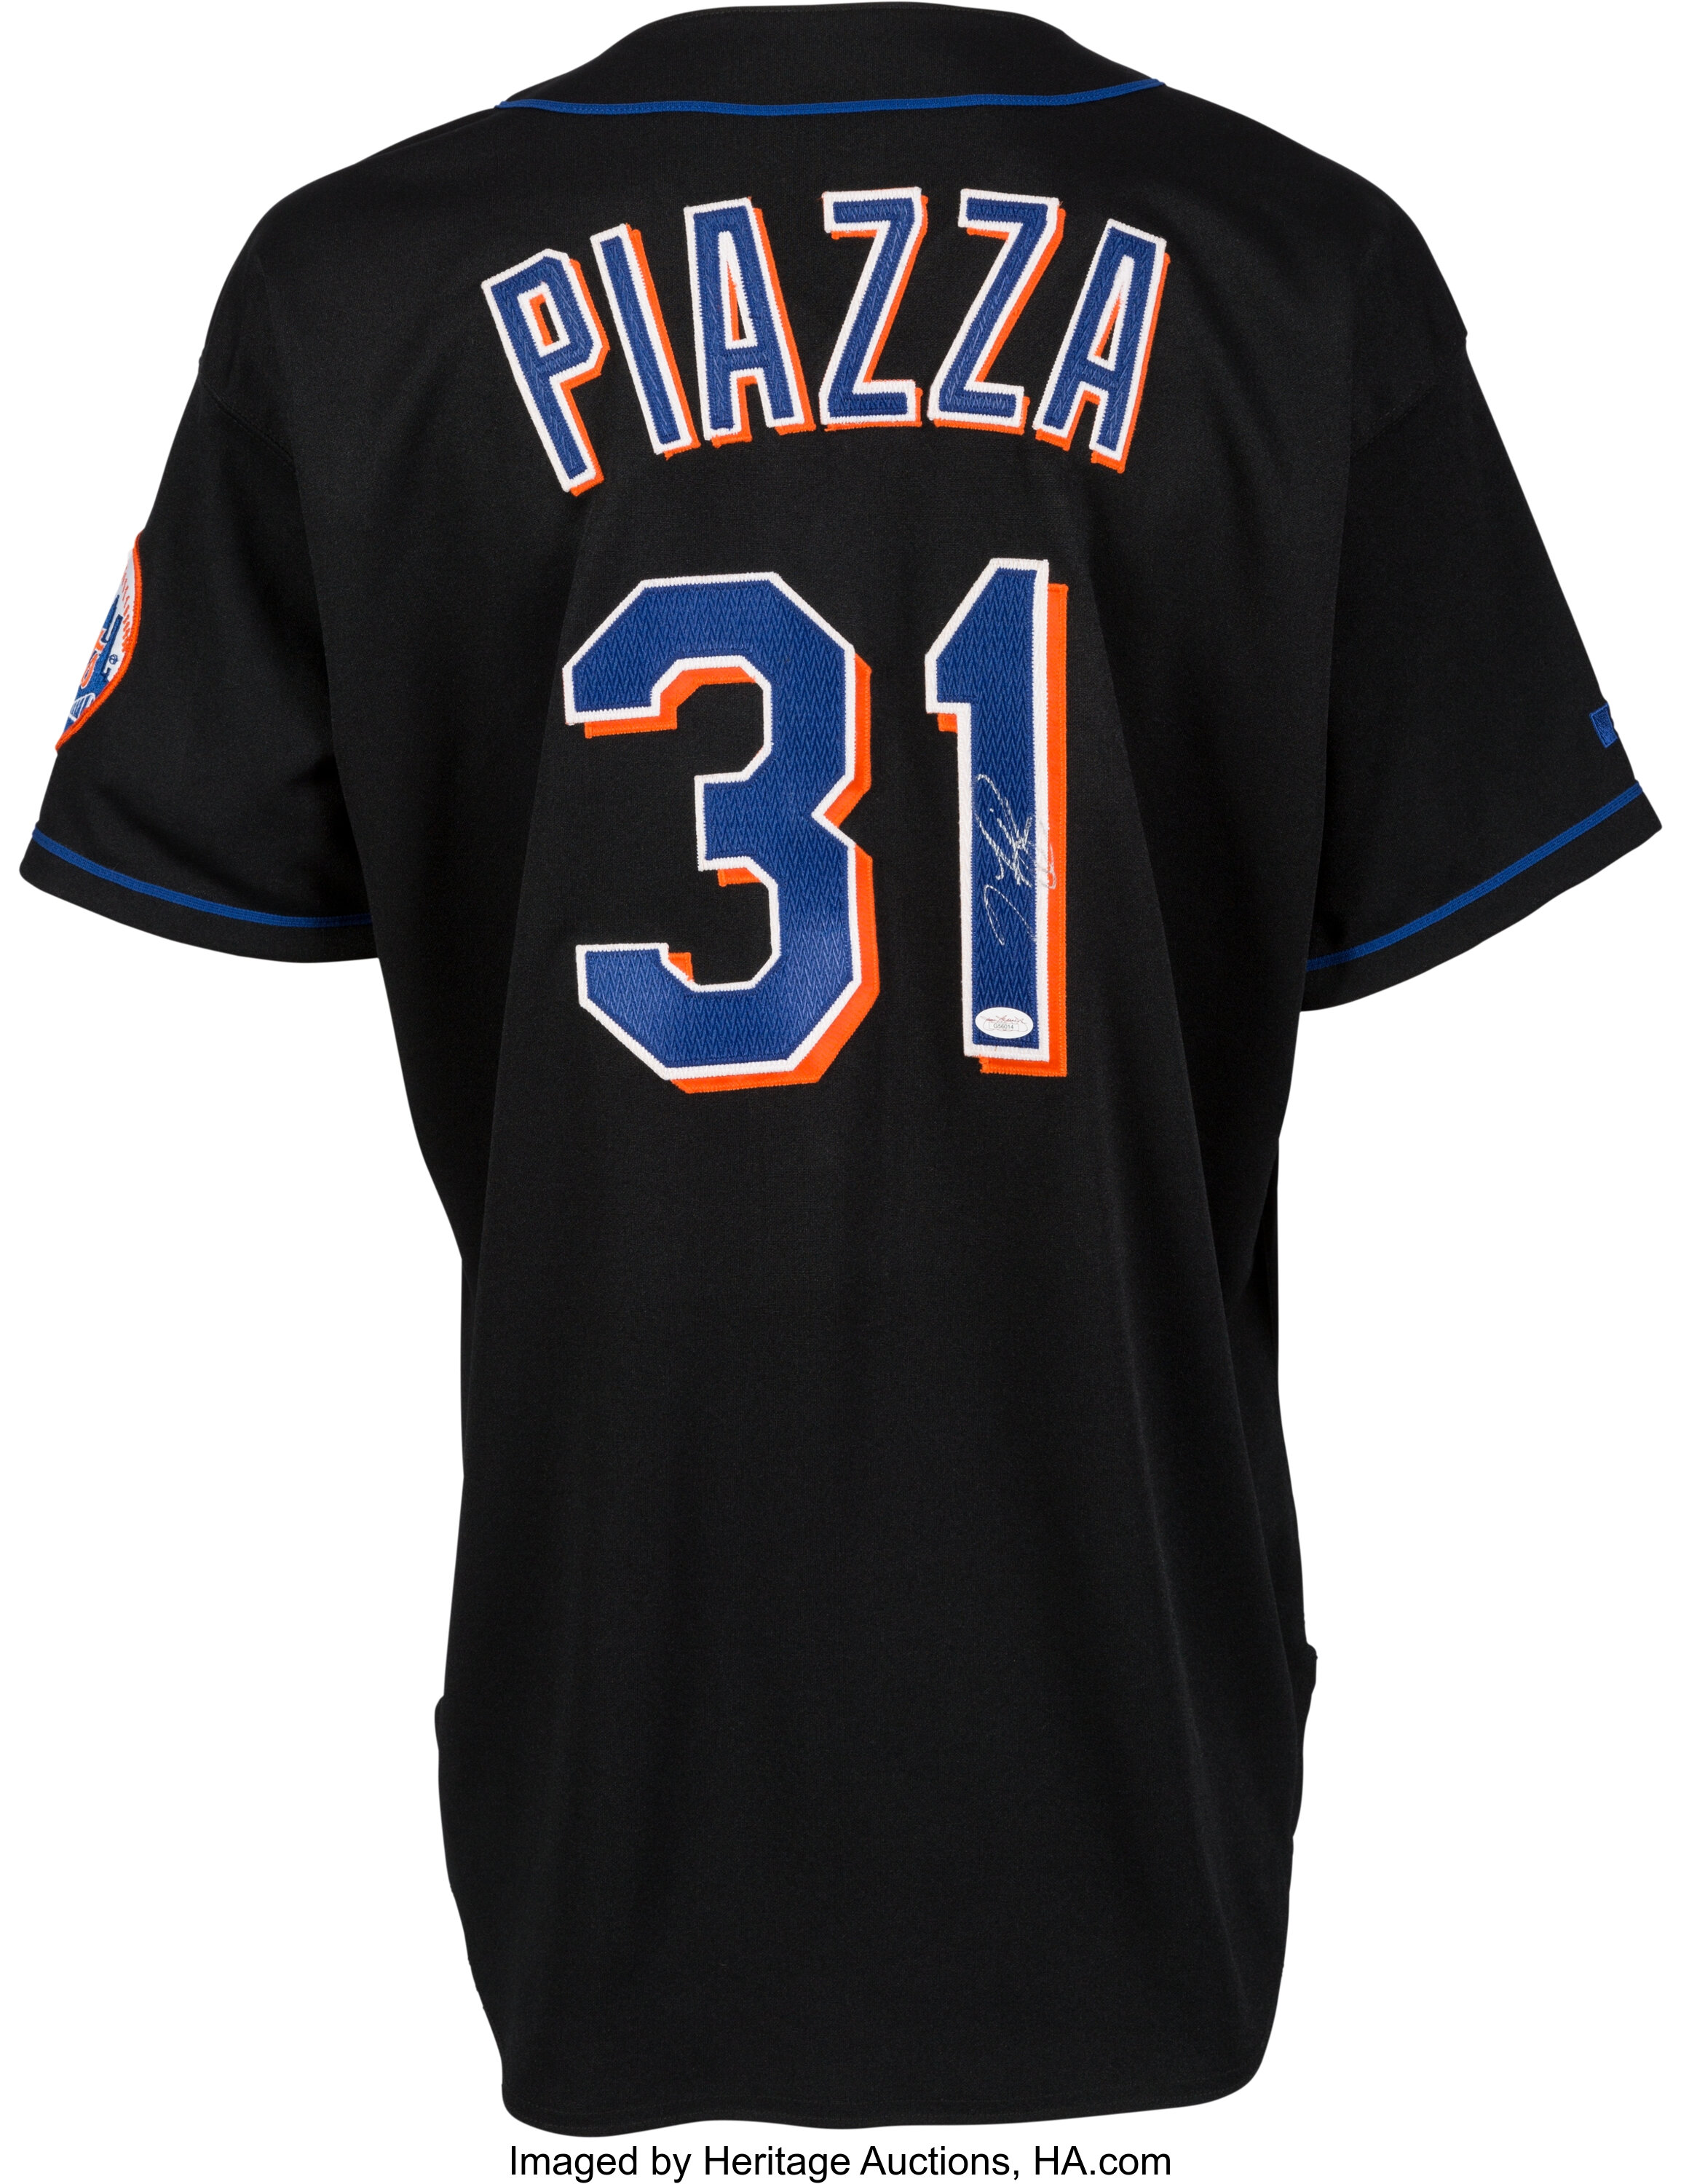 2001 Mike Piazza Game Worn New York Mets Jersey. Baseball